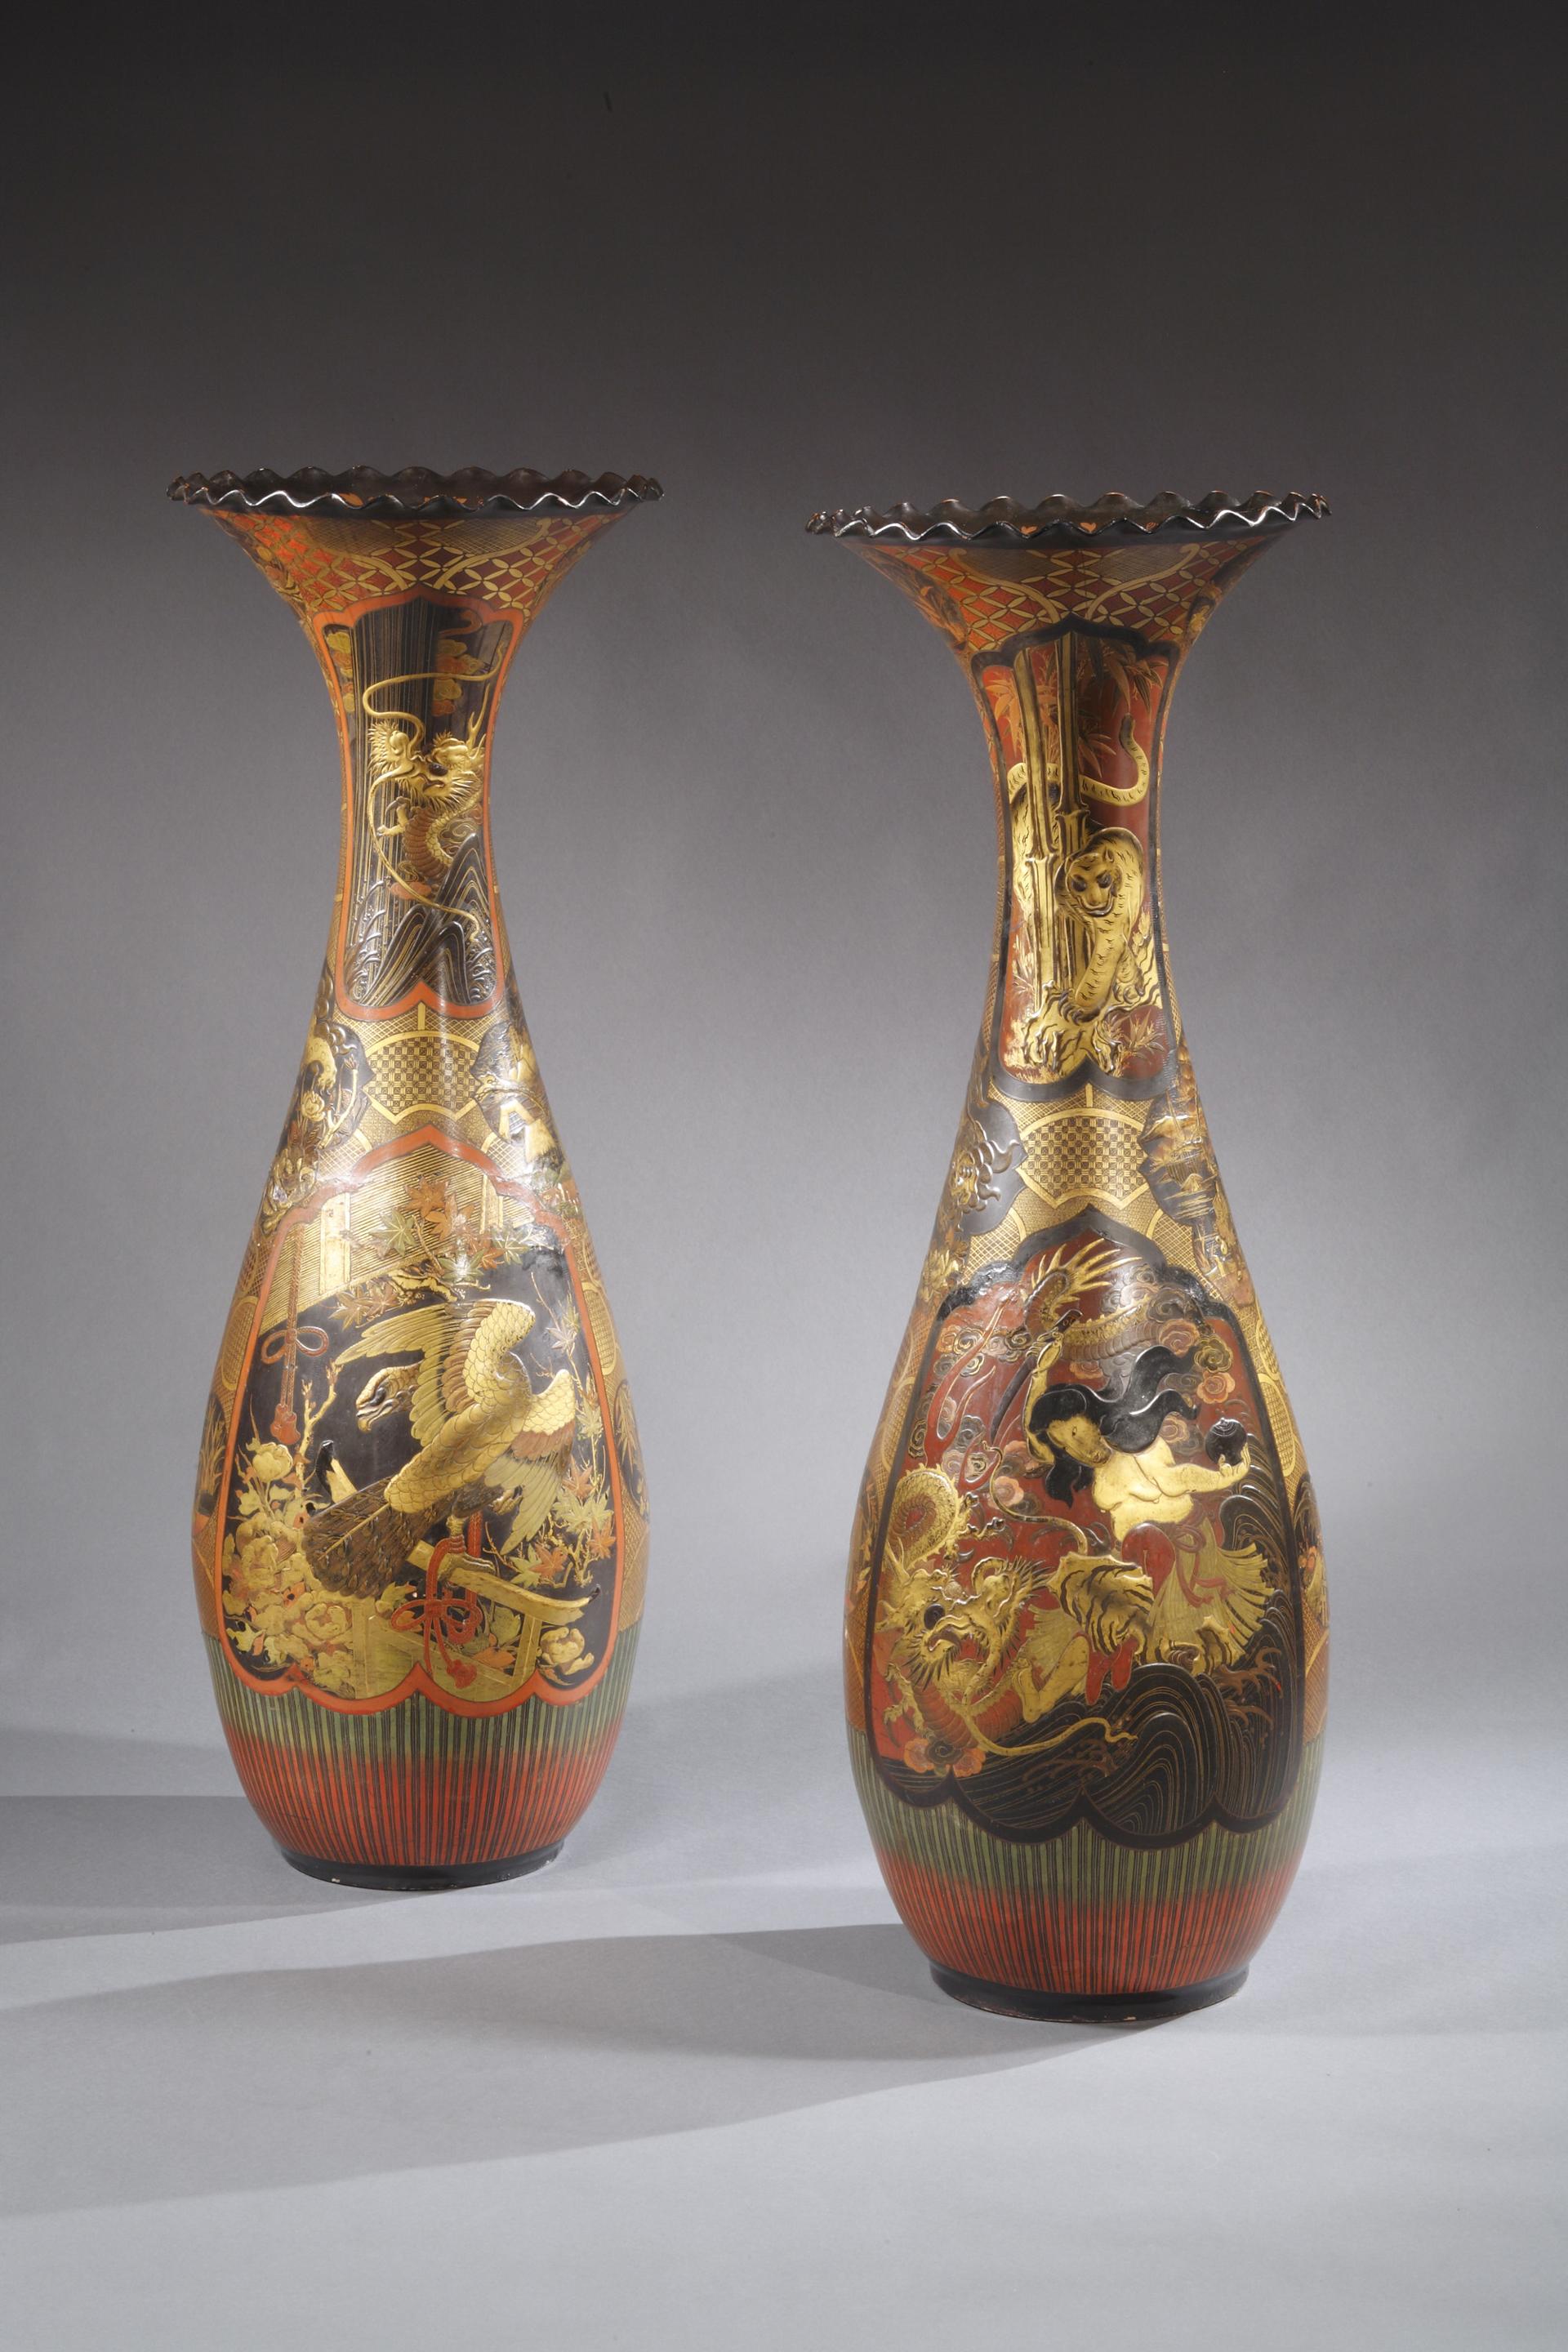 PAIR OF LACQUERED PORCELAIN VASES